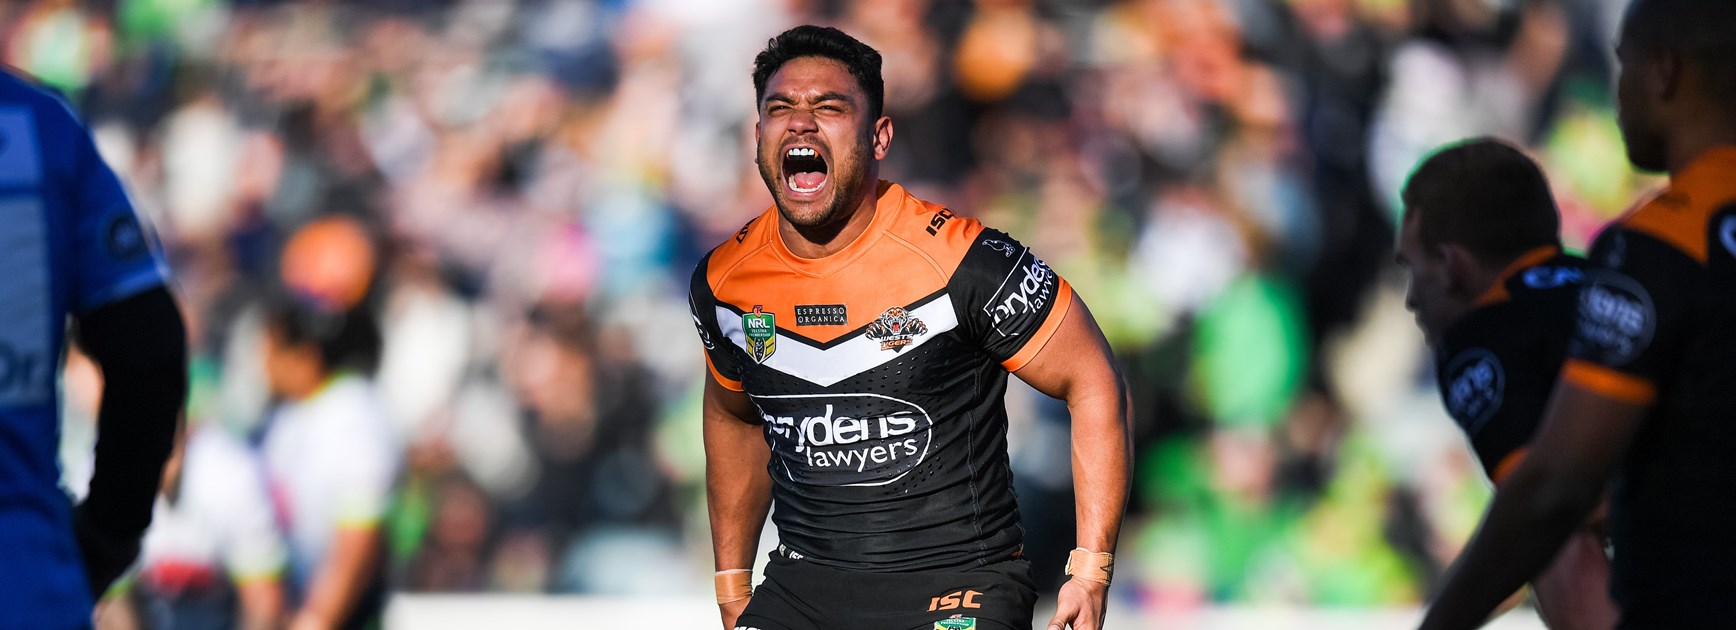 Wests Tigers Results: Round 22